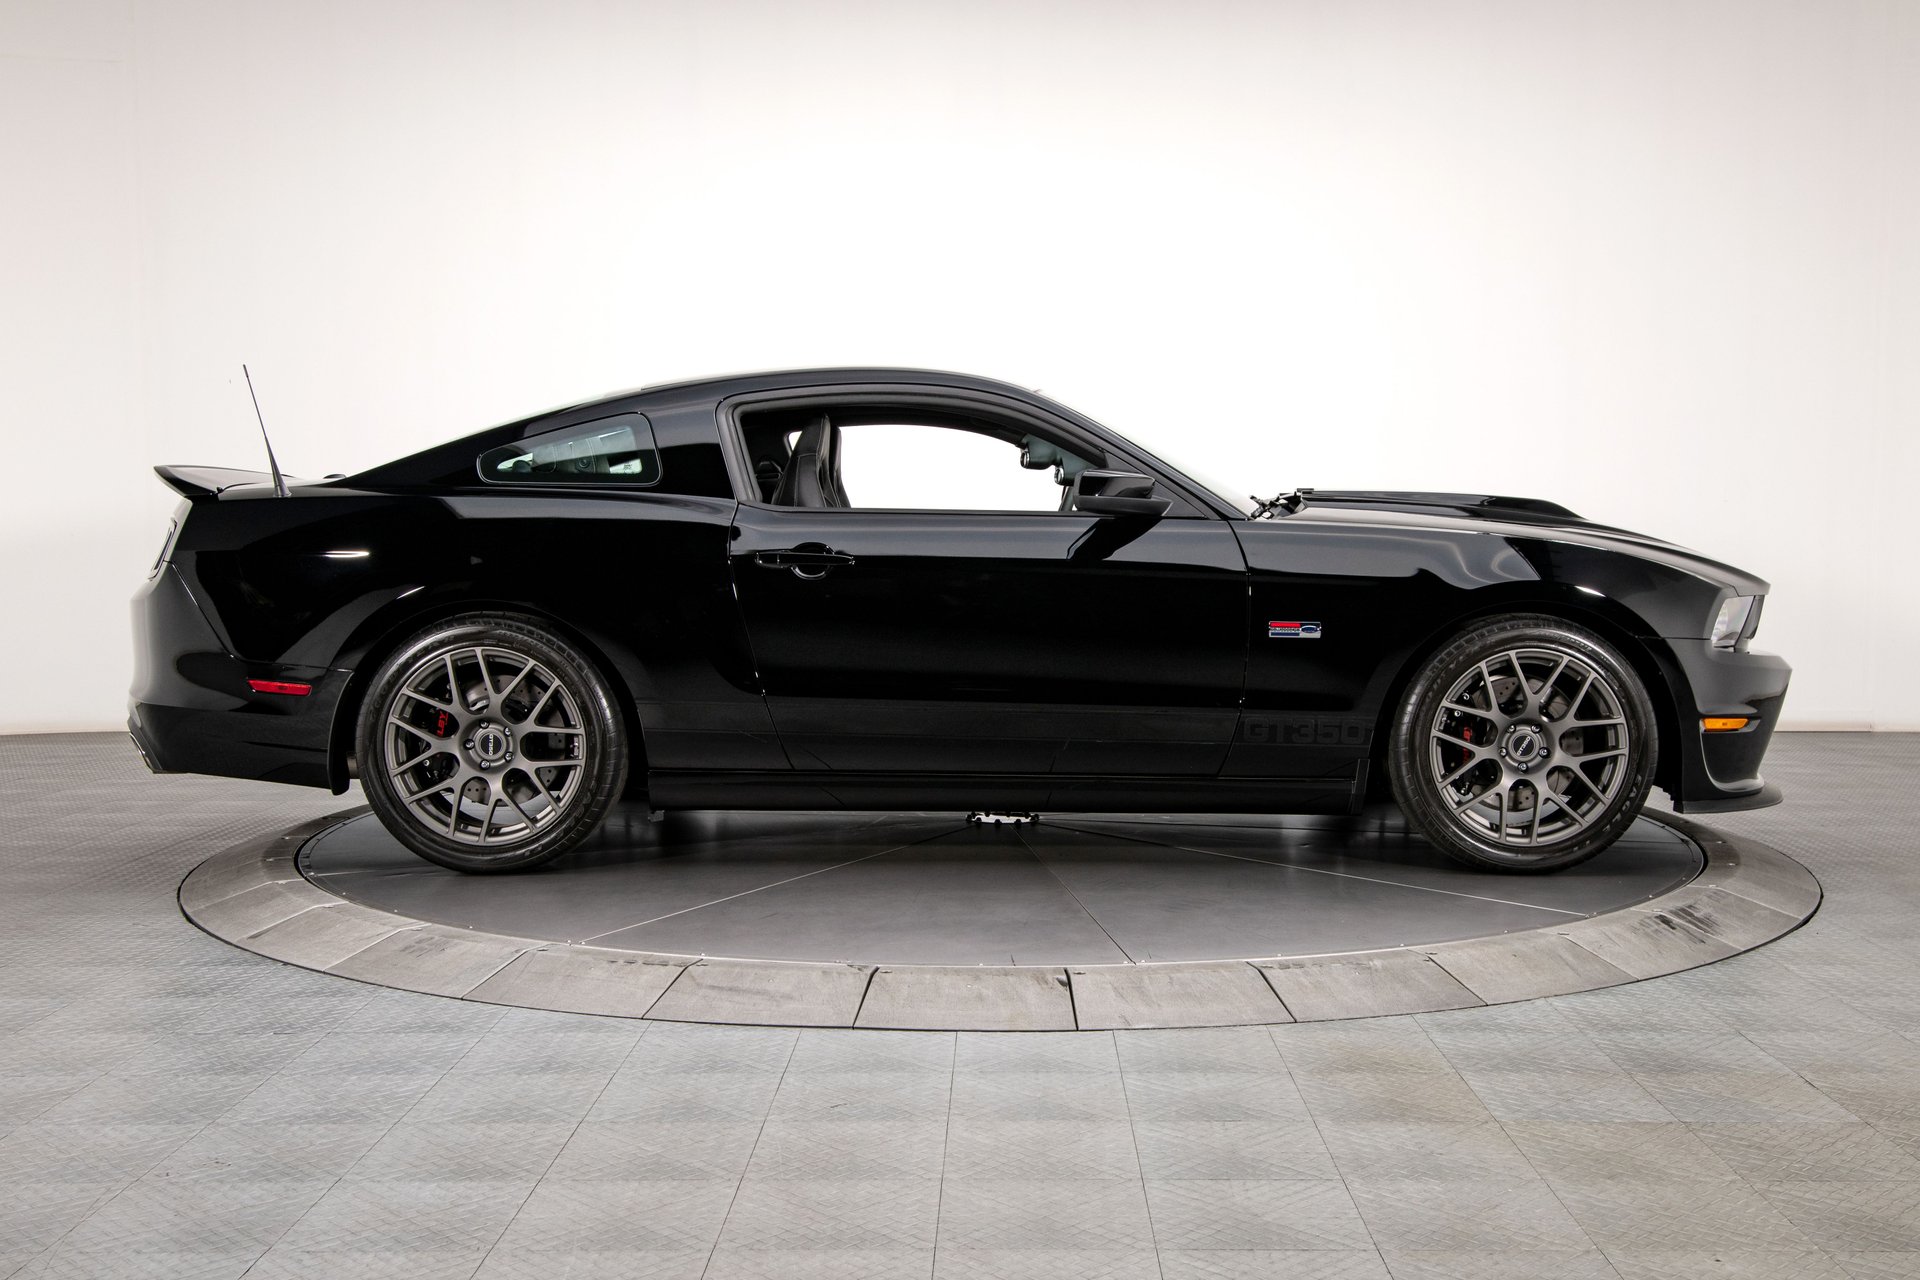 For Sale 2014 Ford Shelby Mustang GT350